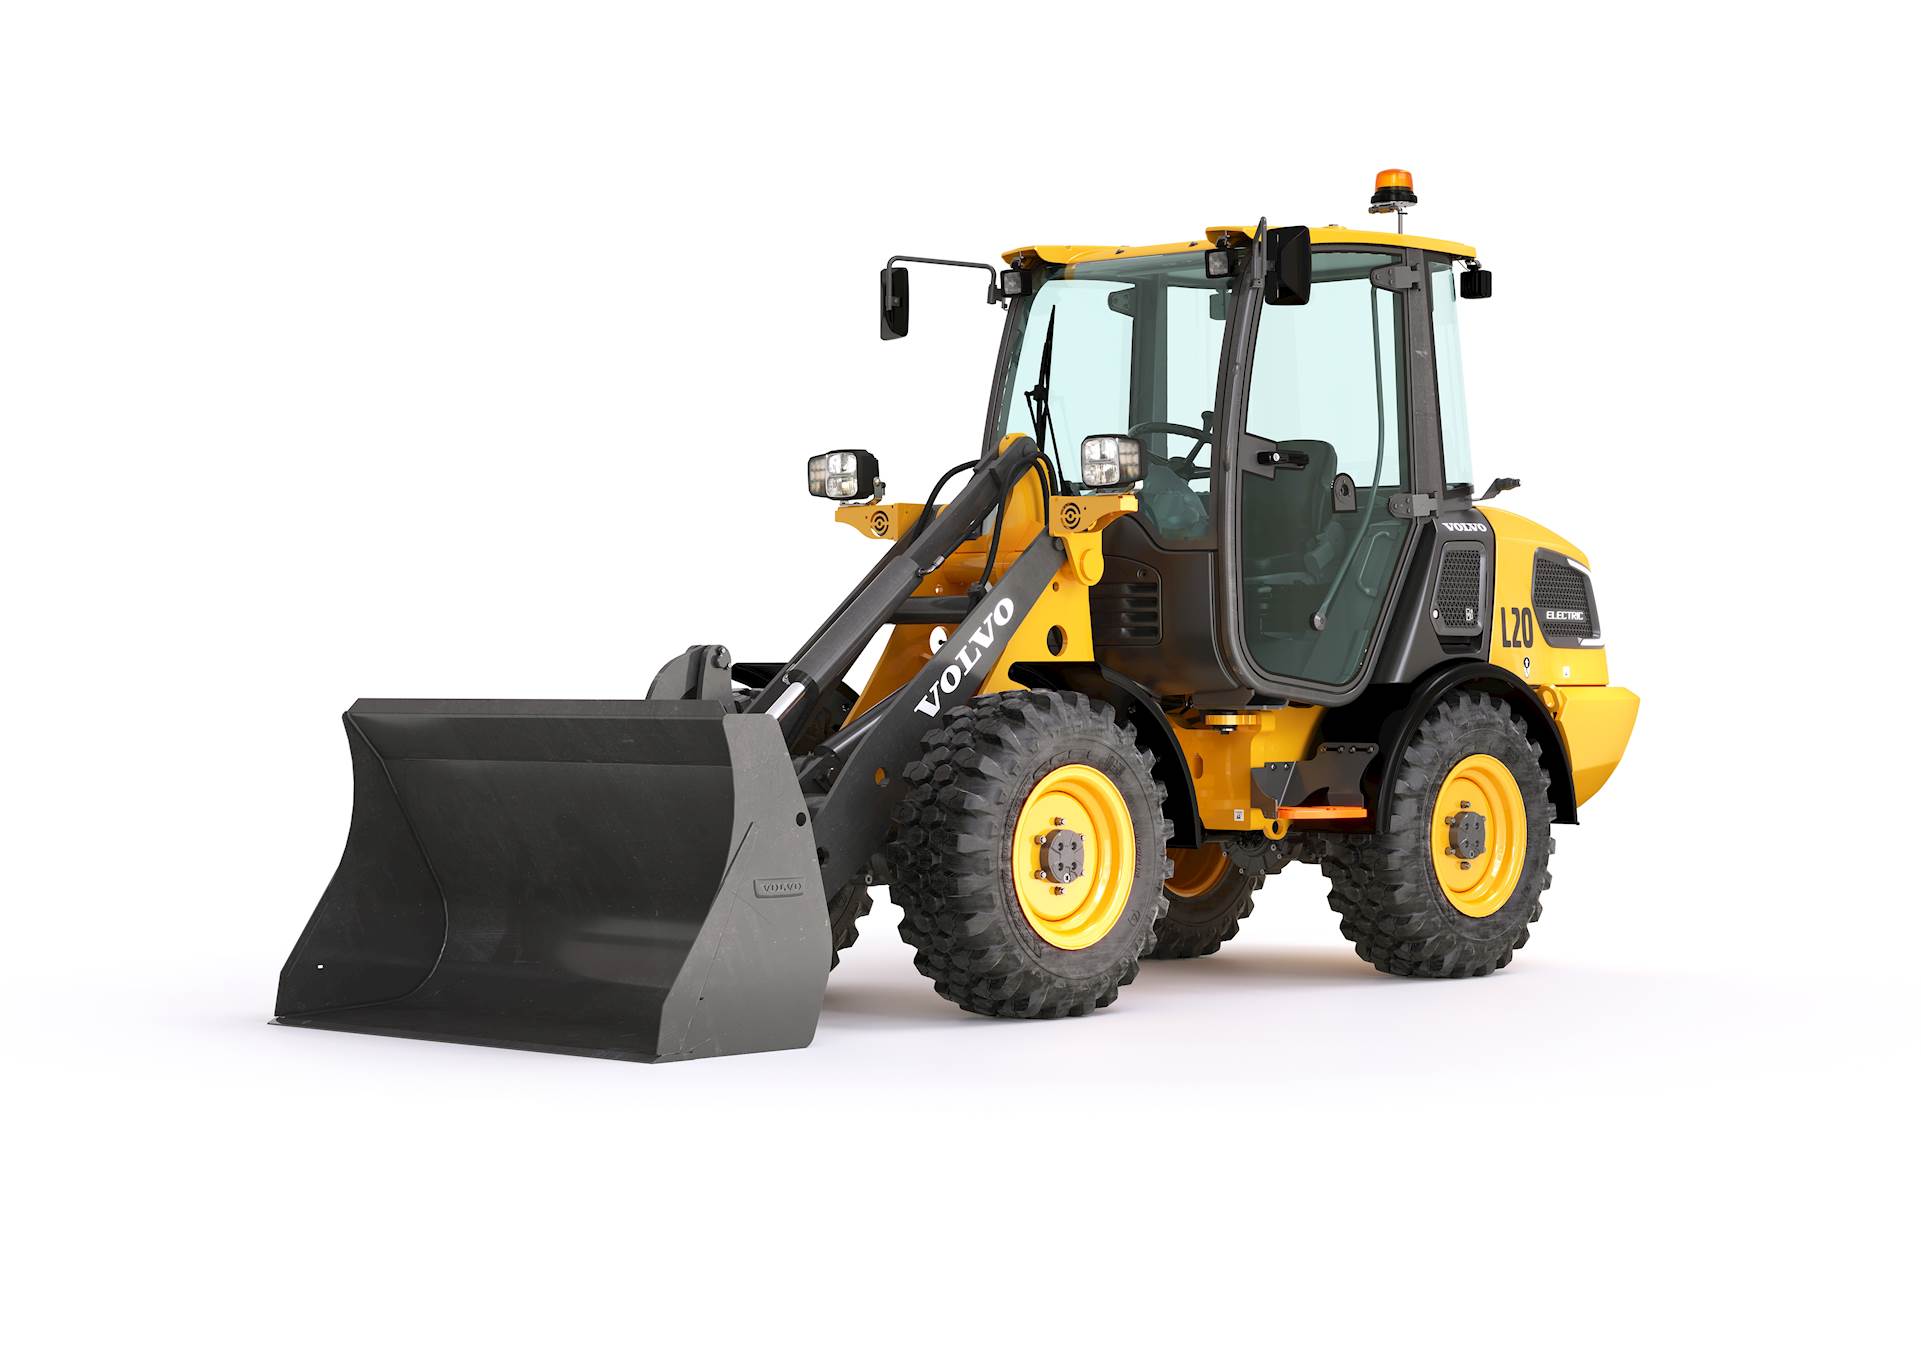 Volvo L20 Electric compact wheel loader